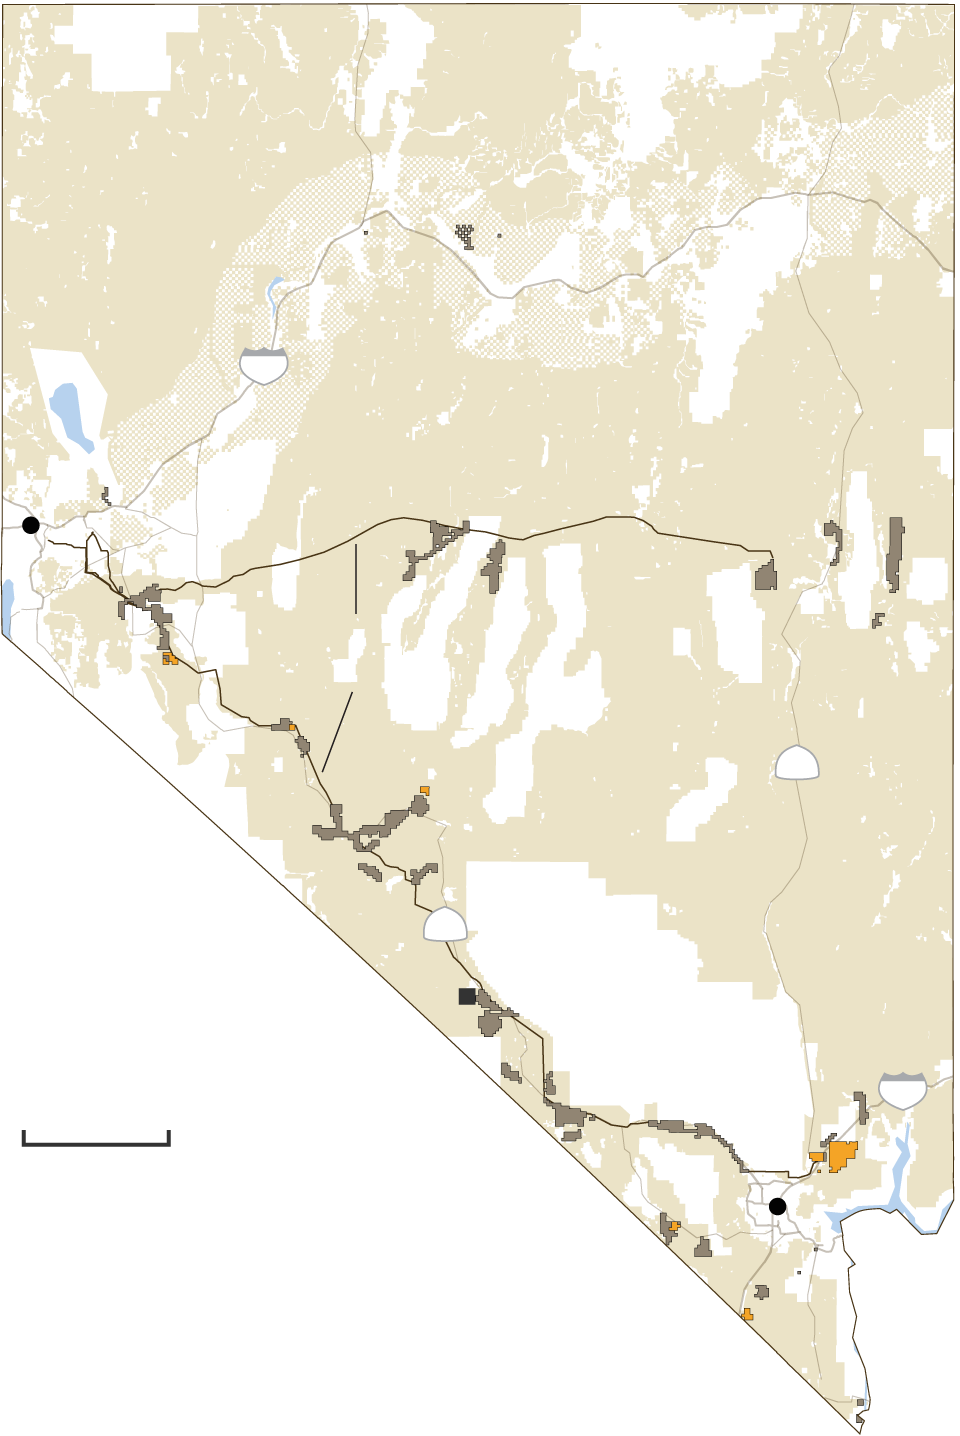 A map of Nevada showing where approved and proposed solar projects are located. The majority of projects are in the southern portion of the state and are clustered along major highways.